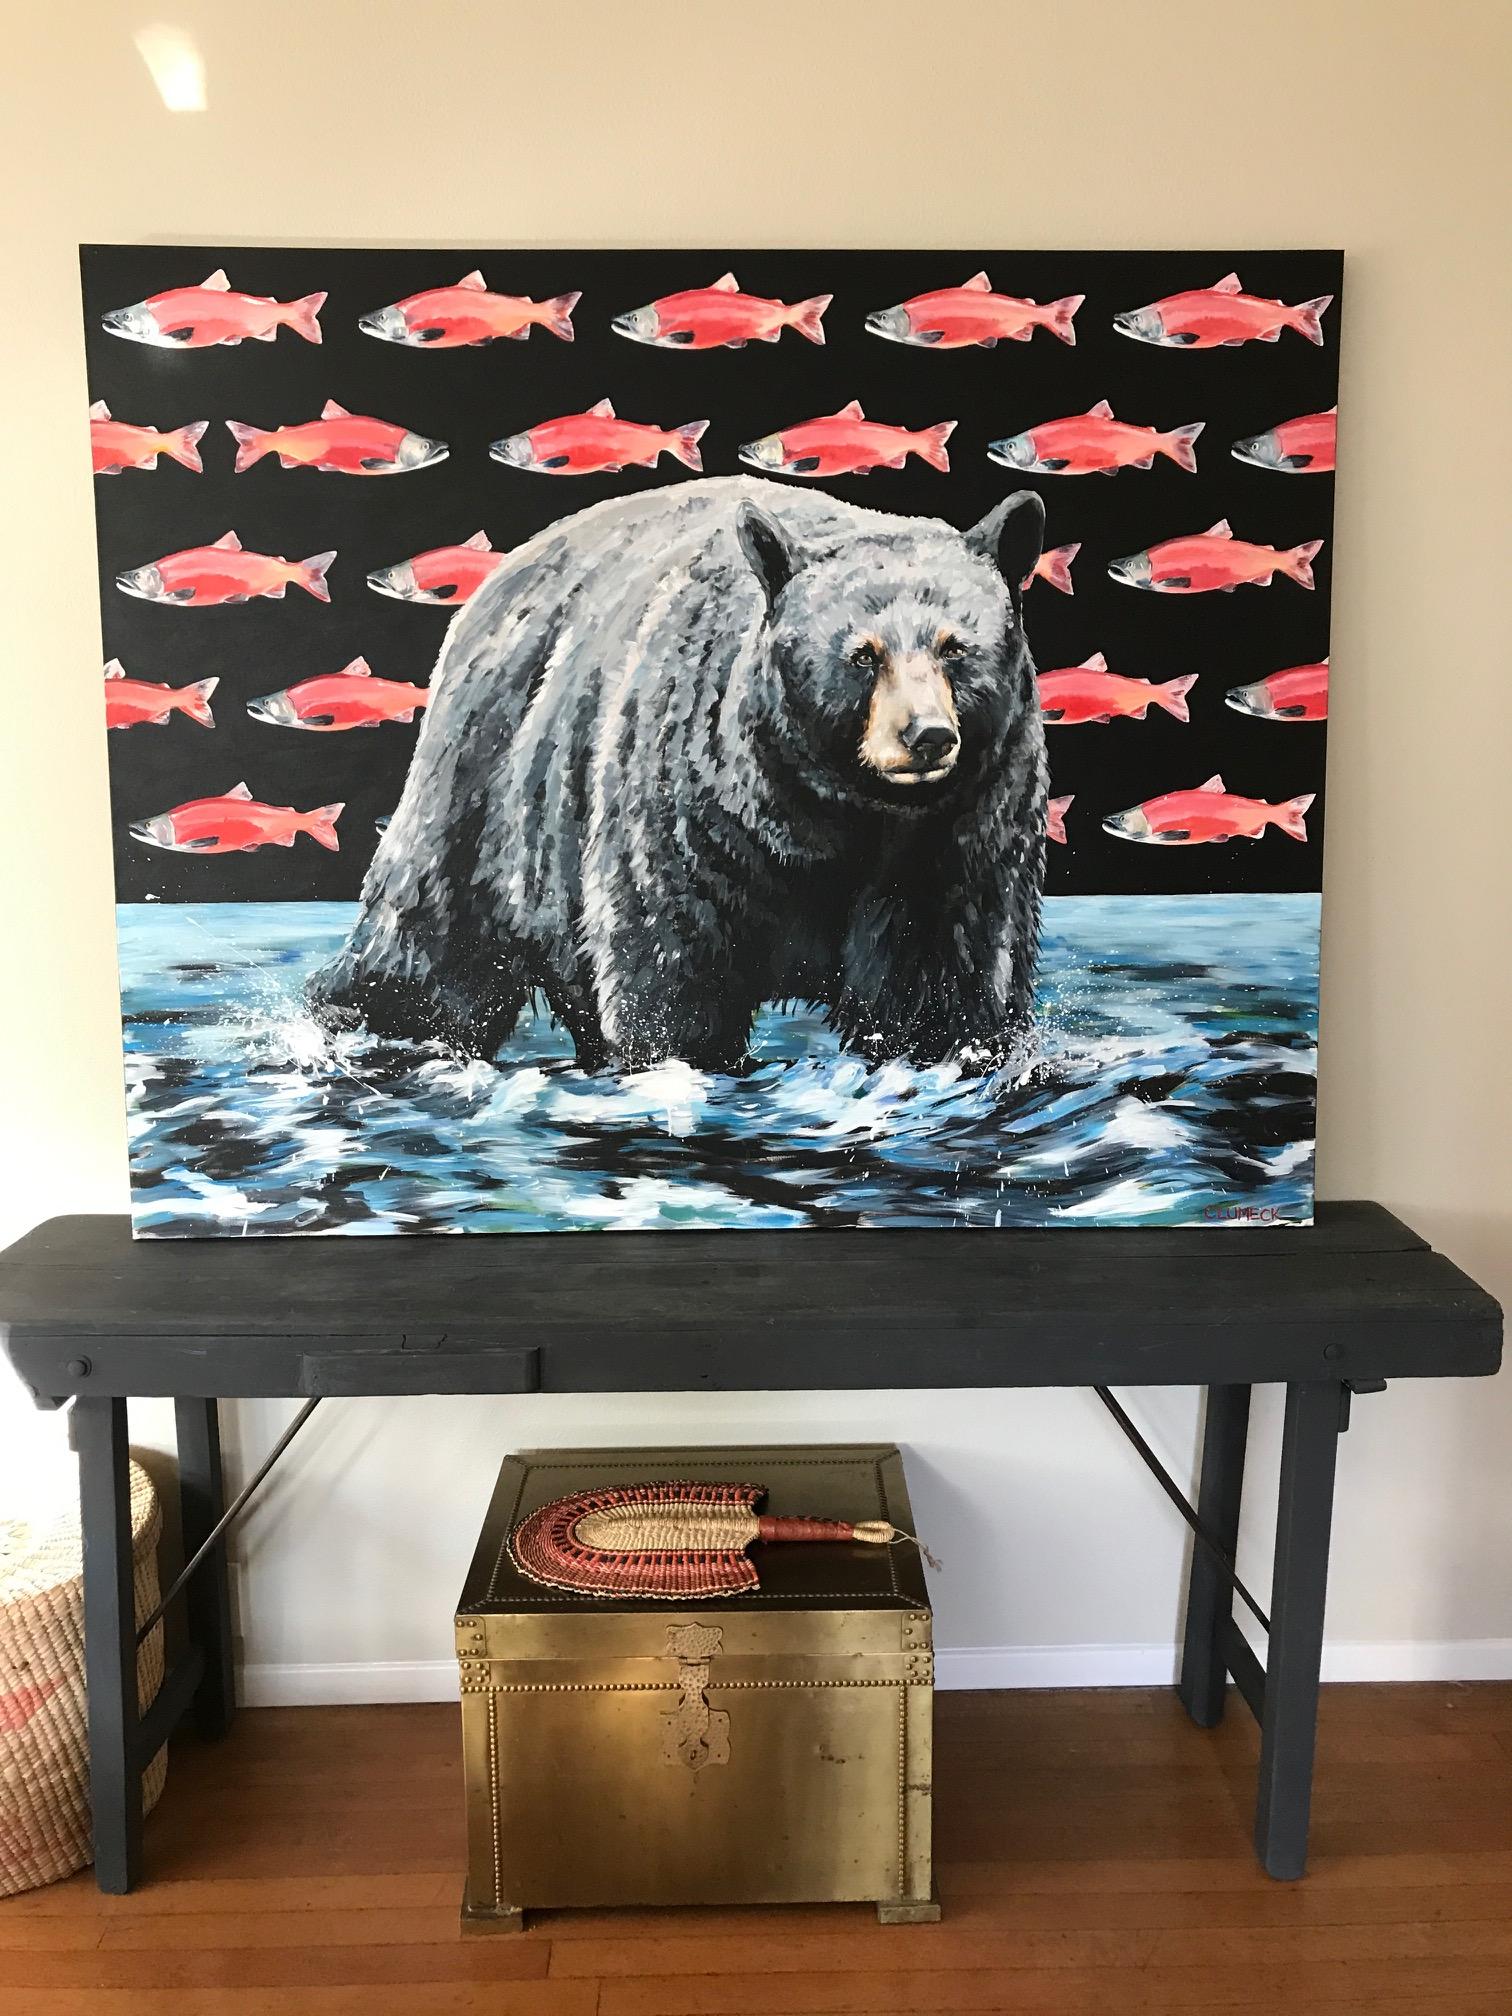 <p>Artist Comments<br /> Since trout and salmon are a main food source for Bears, I thought this would be an excellent choice for the backdrop of the painting. If you look closely you will notice that one of the Sockeye Salmon is facing the opposite